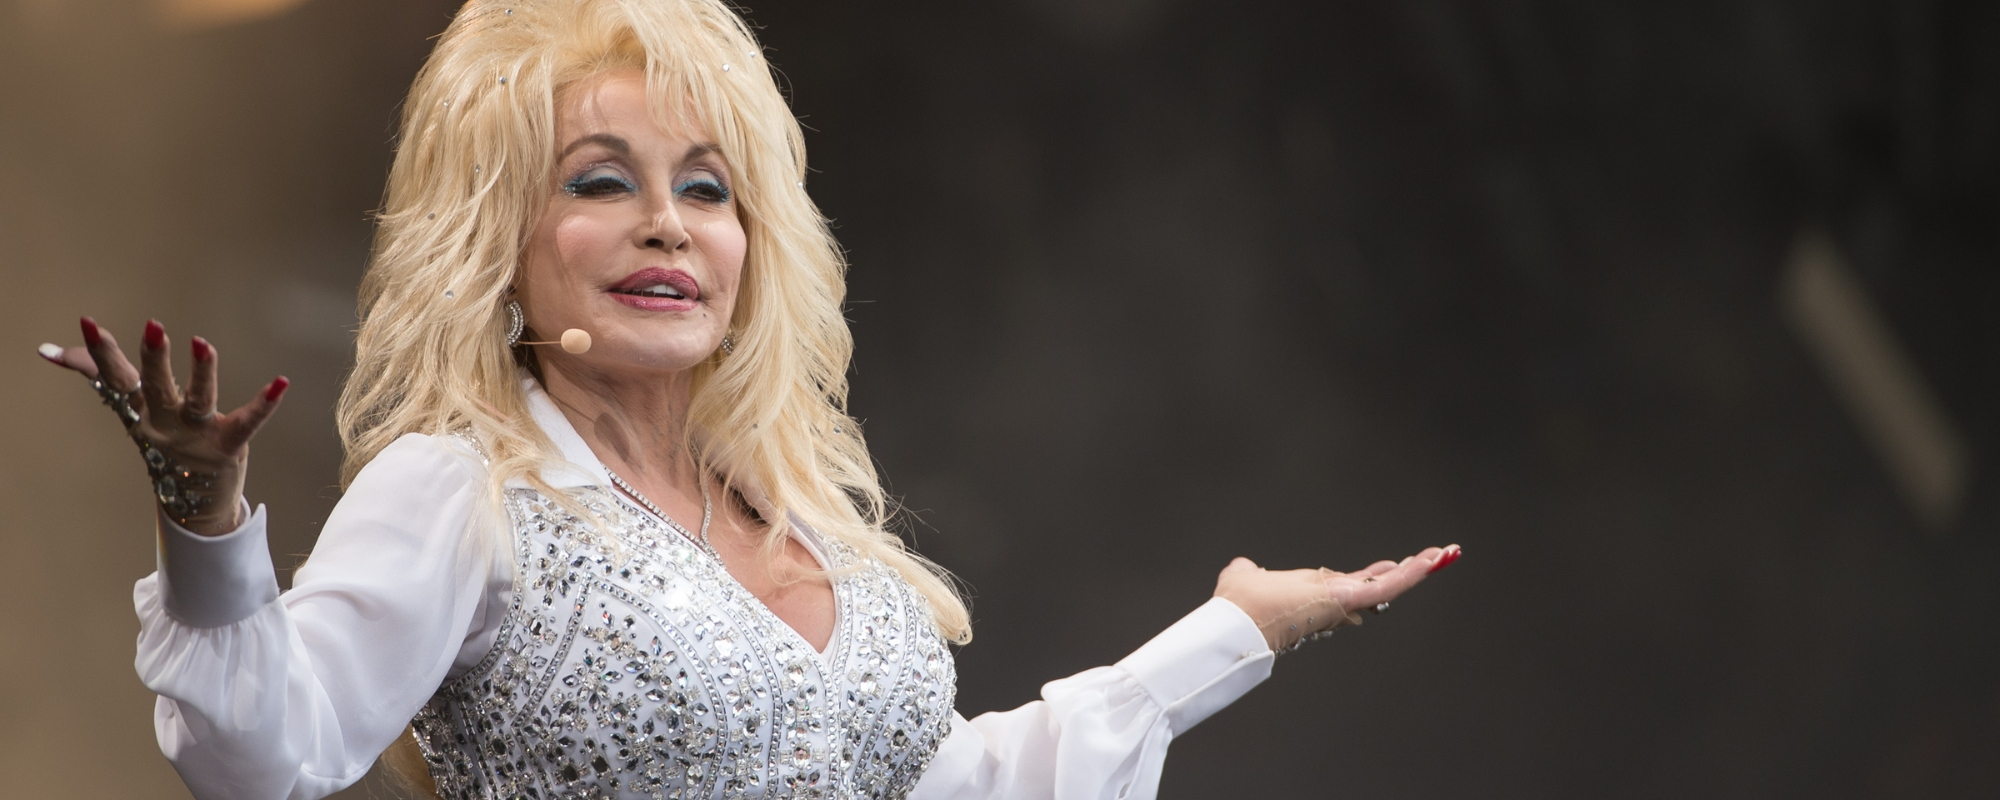 Dolly Parton Could Add to Grammys History and Join the Likes of Carrie Underwood & Taylor Swift